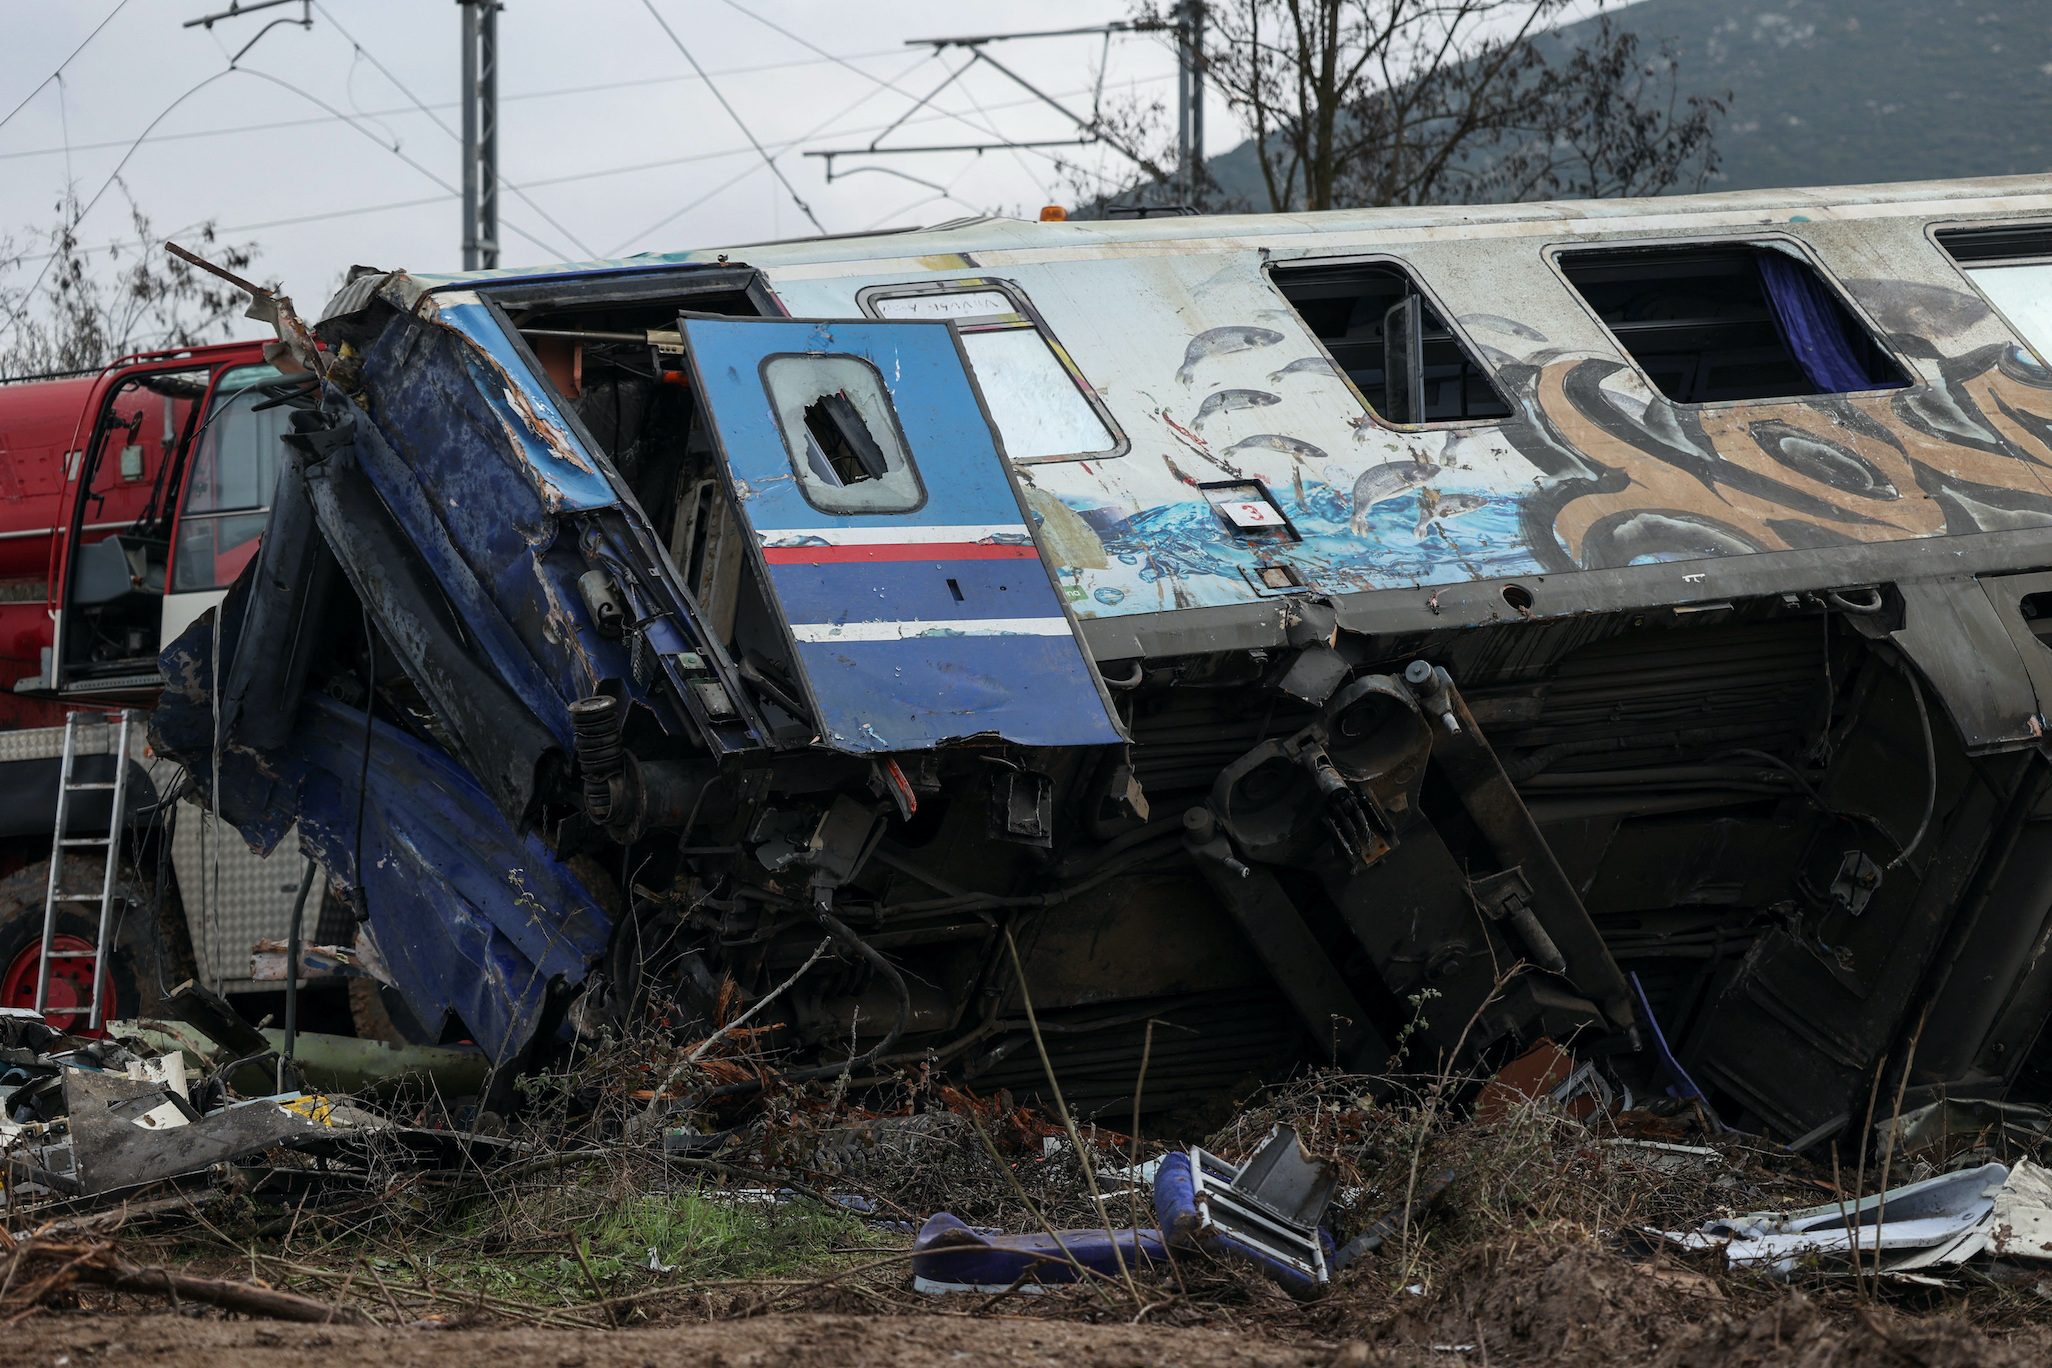 Greece to wrap up search at train crash site, grief turns to anger